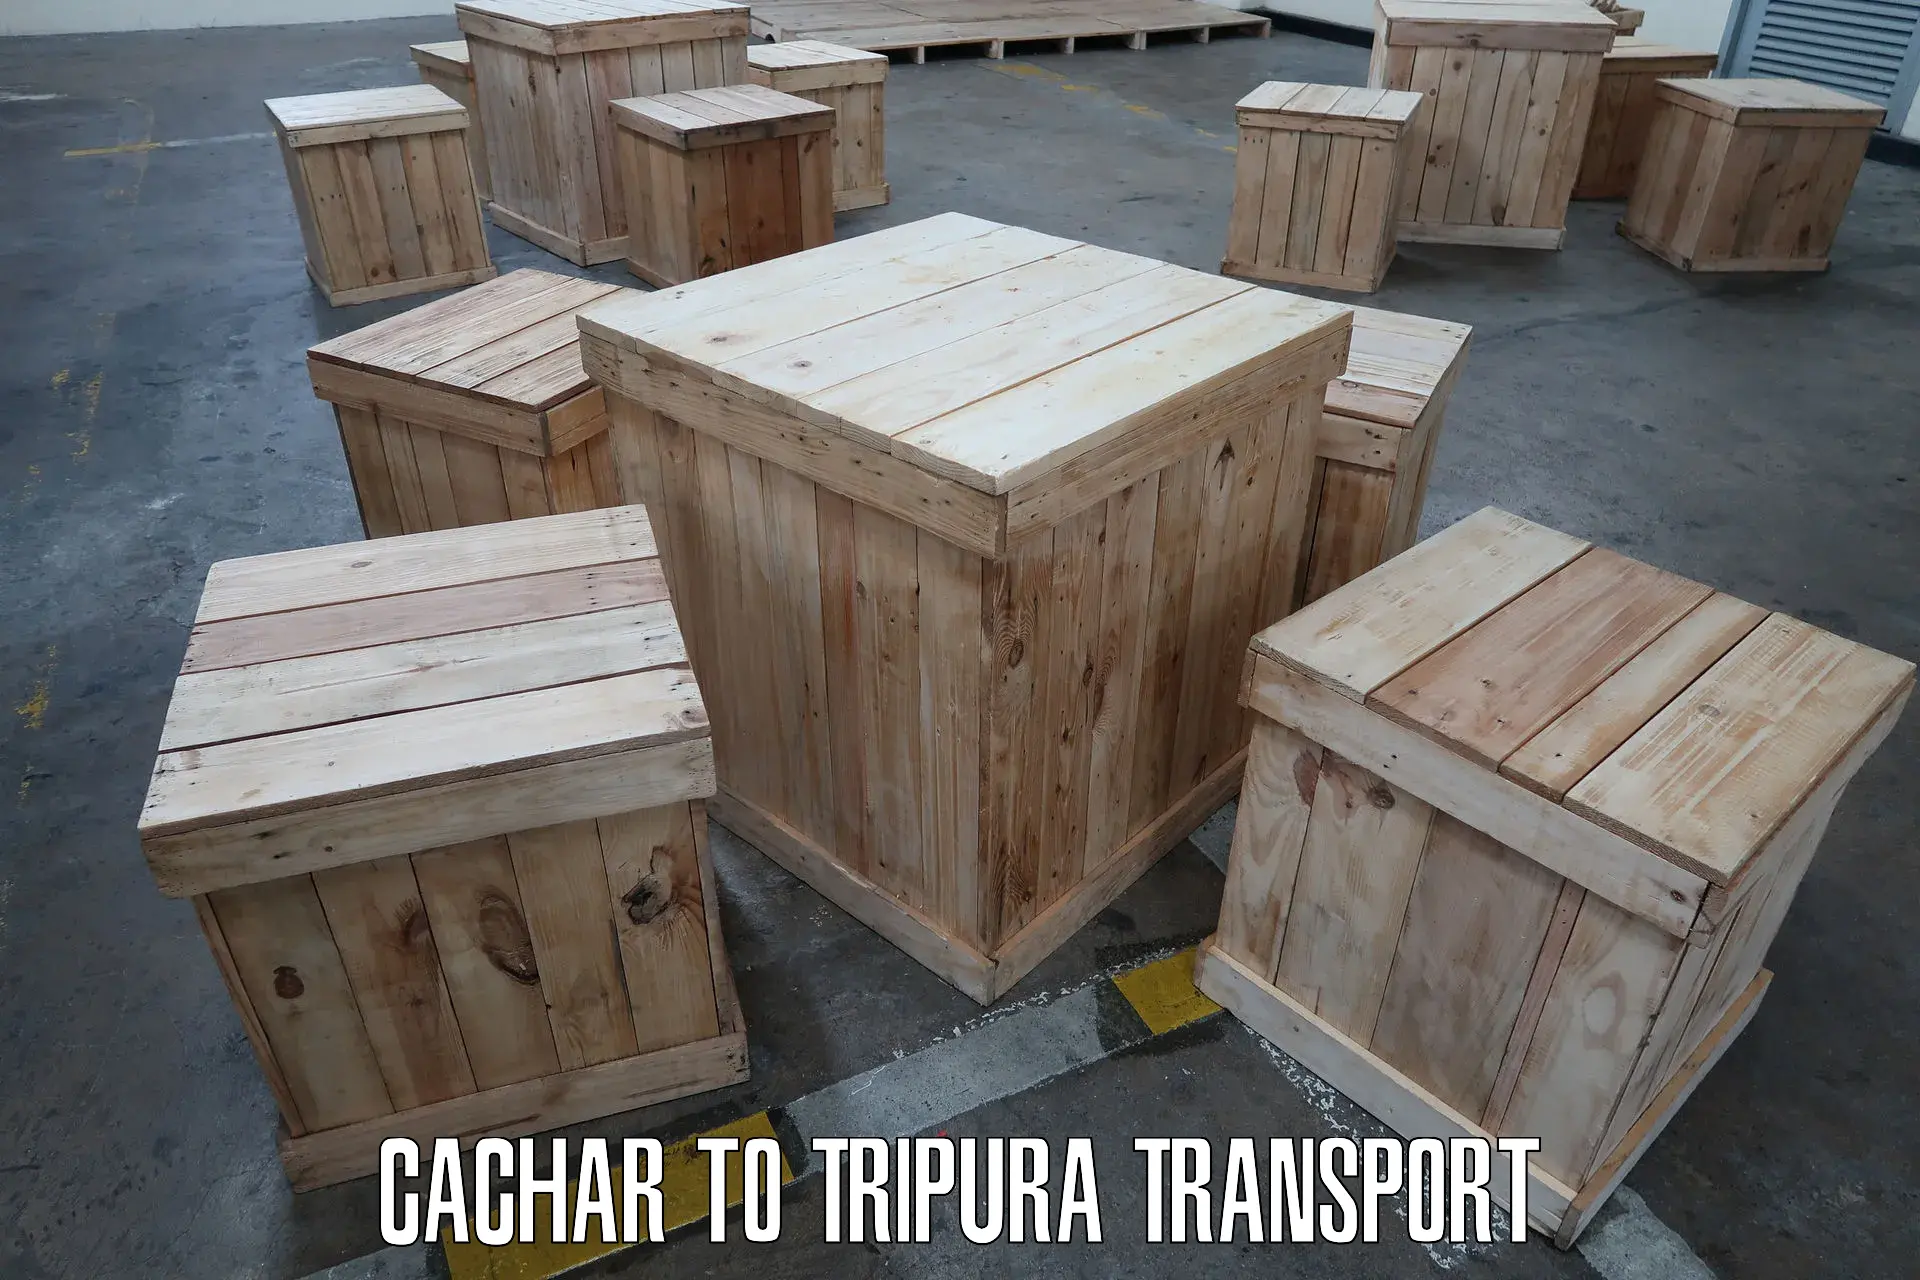 Transport services in Cachar to Agartala